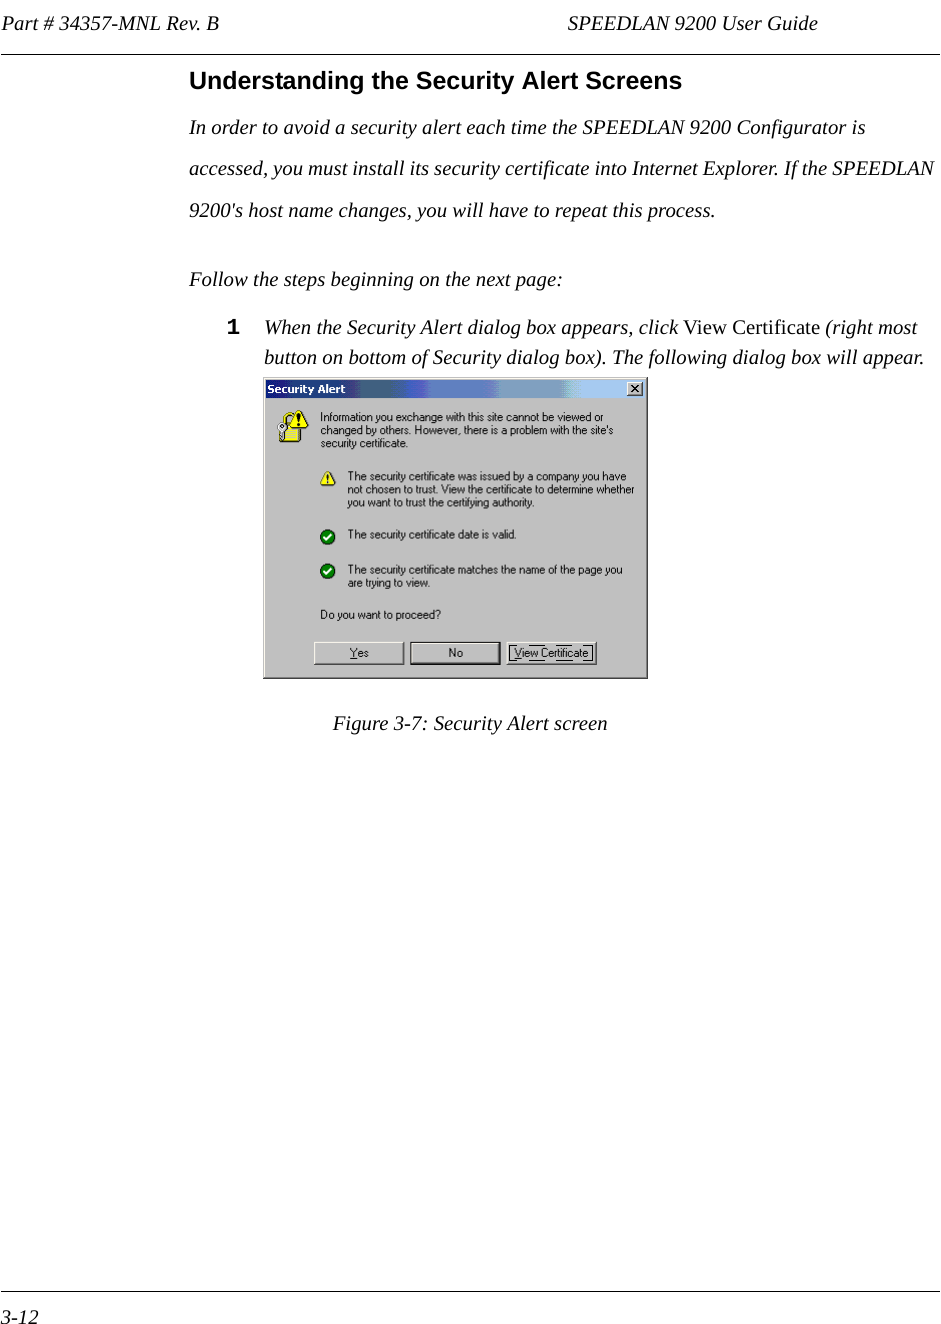 Part # 34357-MNL Rev. B                                                                   SPEEDLAN 9200 User Guide 3-12Understanding the Security Alert ScreensIn order to avoid a security alert each time the SPEEDLAN 9200 Configurator is accessed, you must install its security certificate into Internet Explorer. If the SPEEDLAN 9200&apos;s host name changes, you will have to repeat this process. Follow the steps beginning on the next page:1When the Security Alert dialog box appears, click View Certificate (right most button on bottom of Security dialog box). The following dialog box will appear.Figure 3-7: Security Alert screen